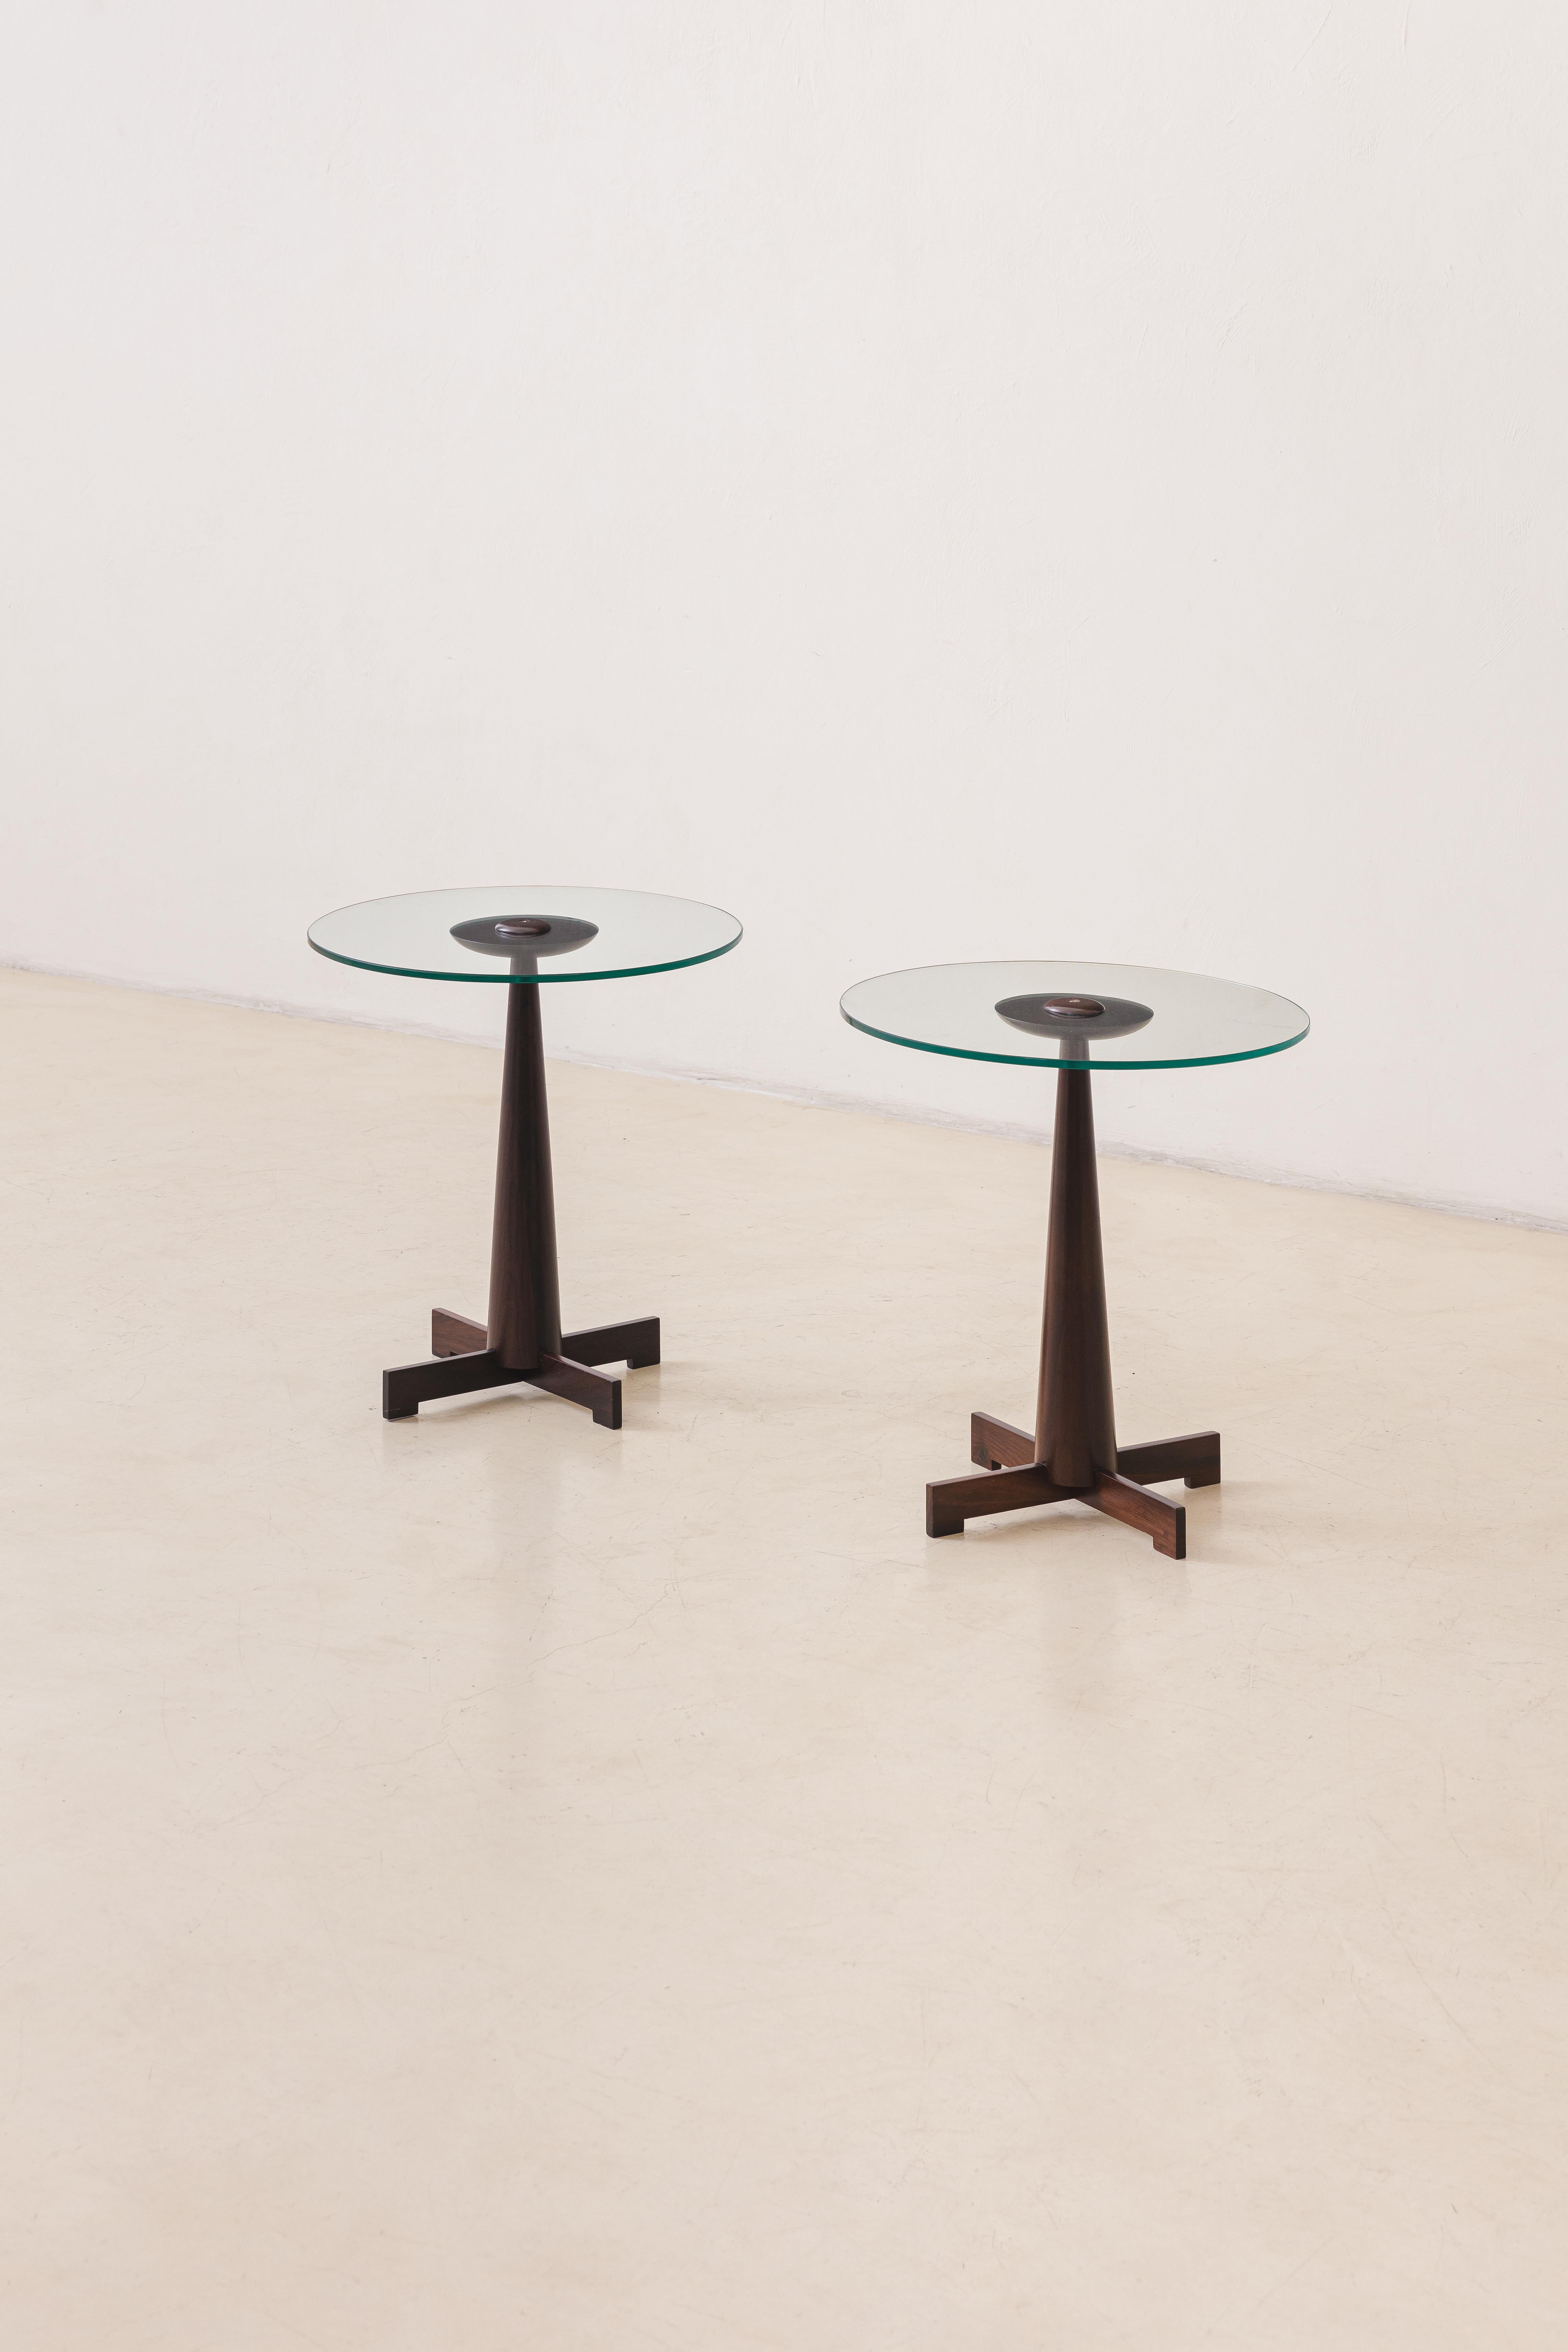 Mid-20th Century Me 508 Side Tables by Jorge Zalszupin, Rosewood and Glass, Brazil, circa 1959 For Sale